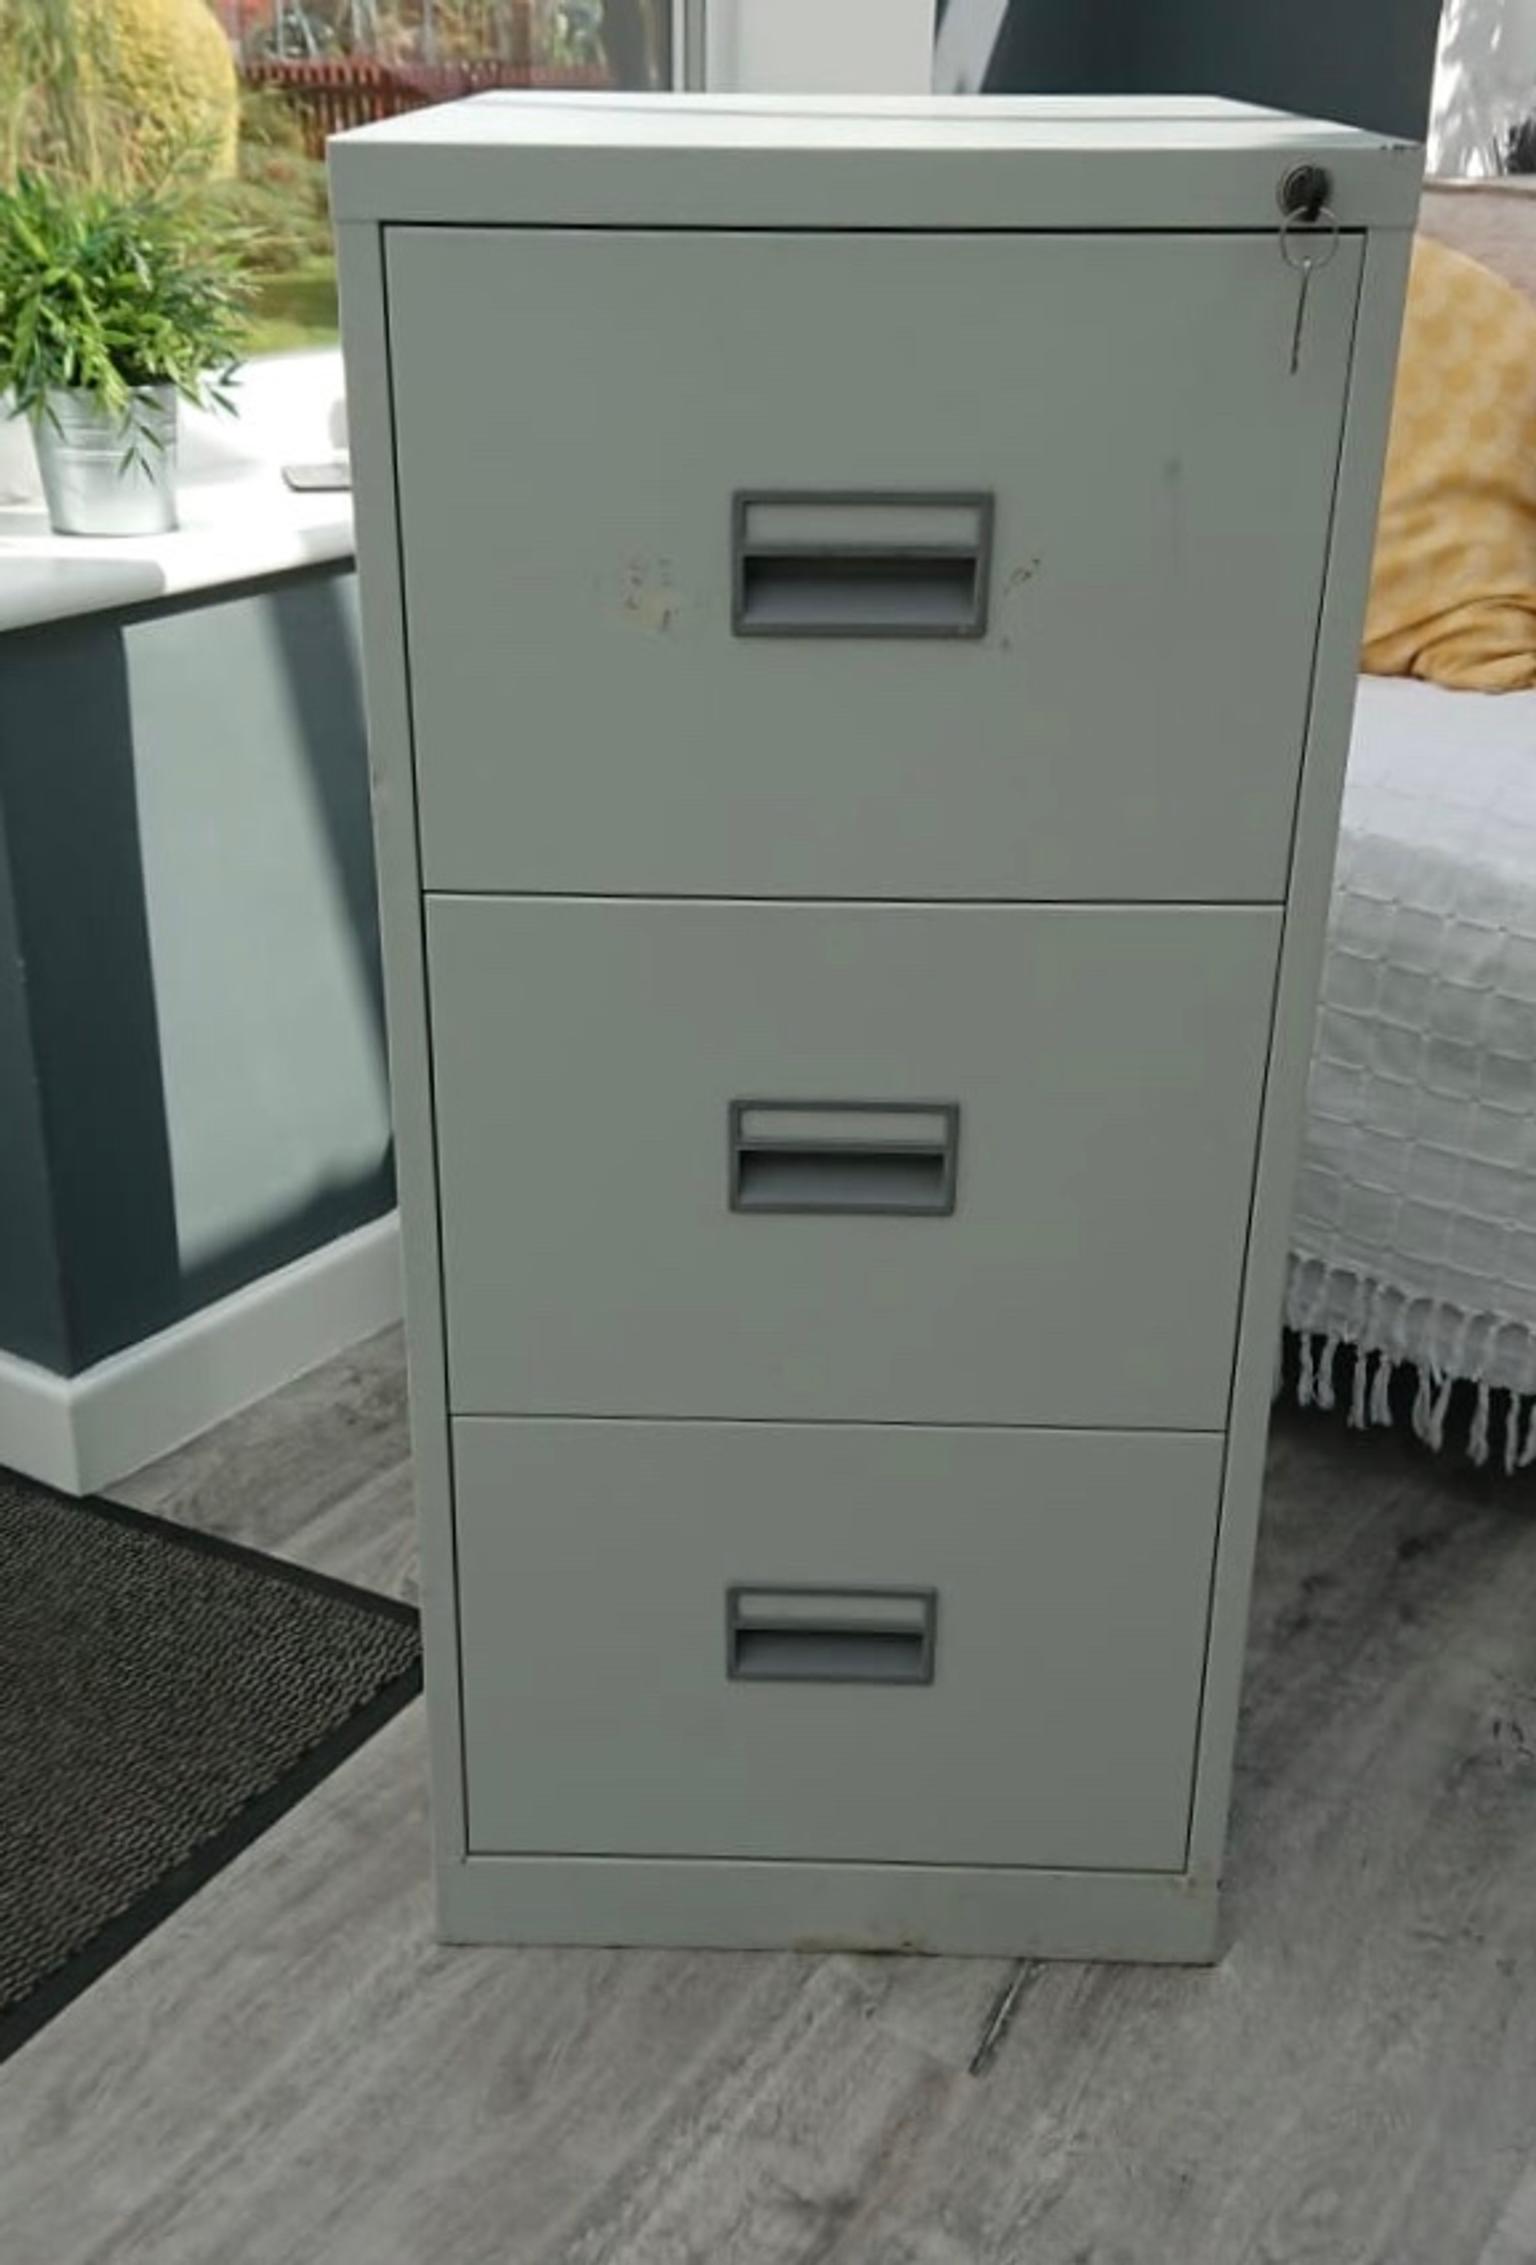 Three Drawer Grey Filing Cabinet In Sk8 Stockport For 25 00 For